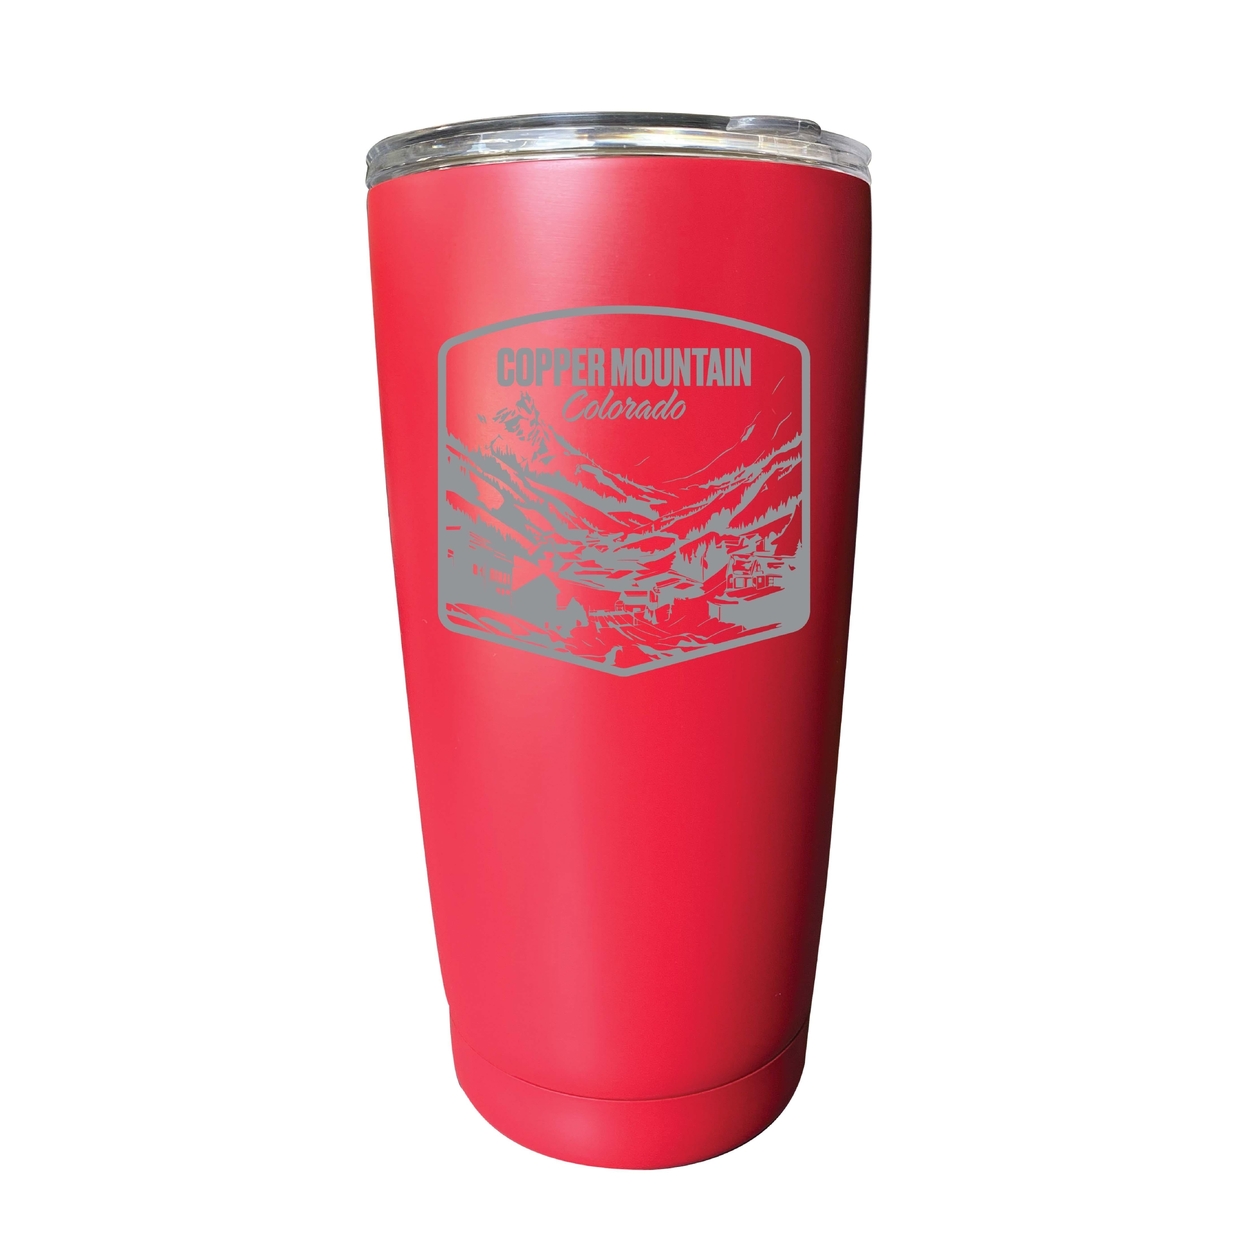 Copper Mountain Souvenir 16 Oz Engraved Insulated Tumbler - Red,,4-Pack